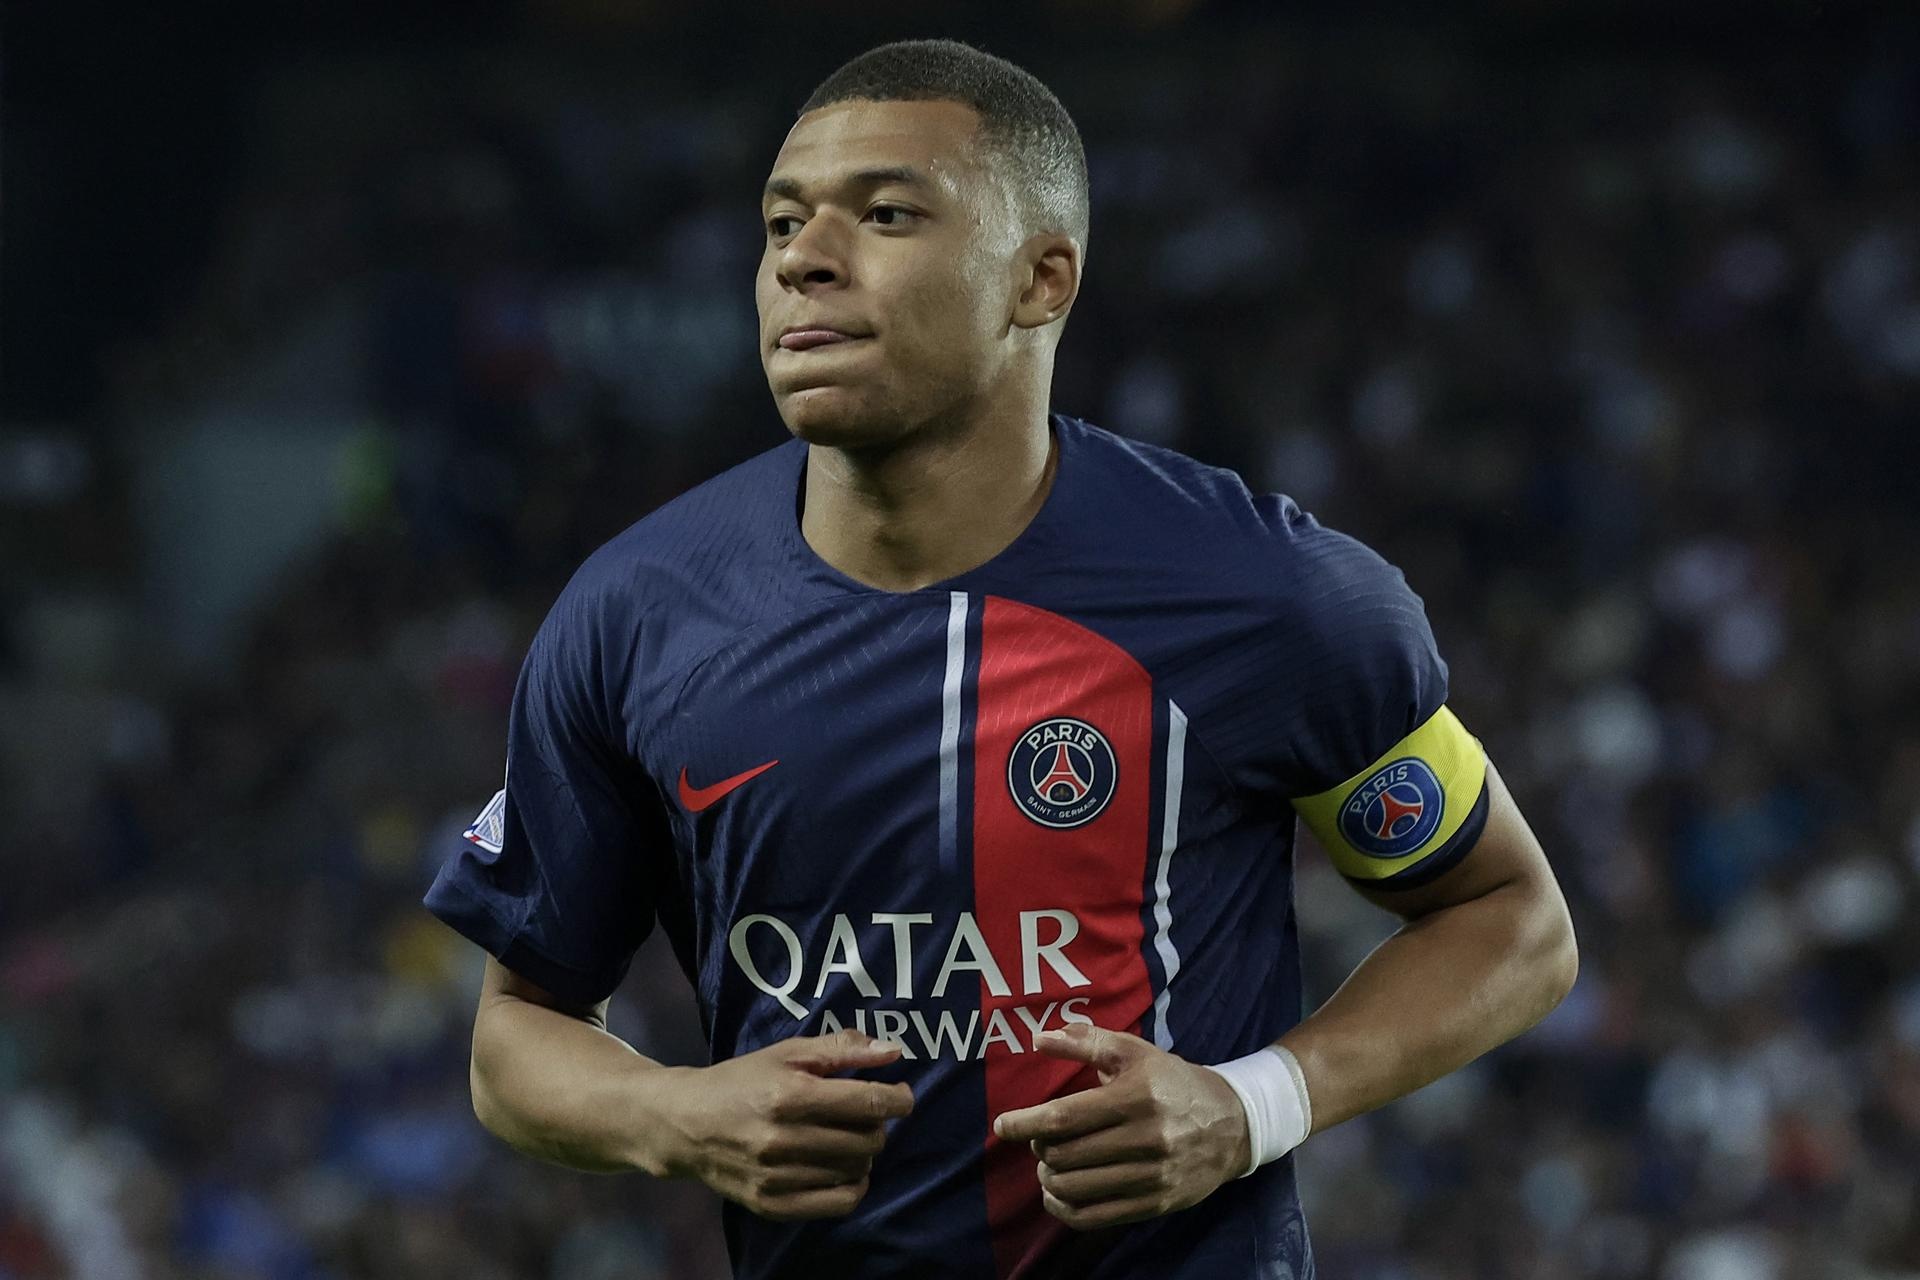 Liverpool 'in competition' with Madrid for Mbappe